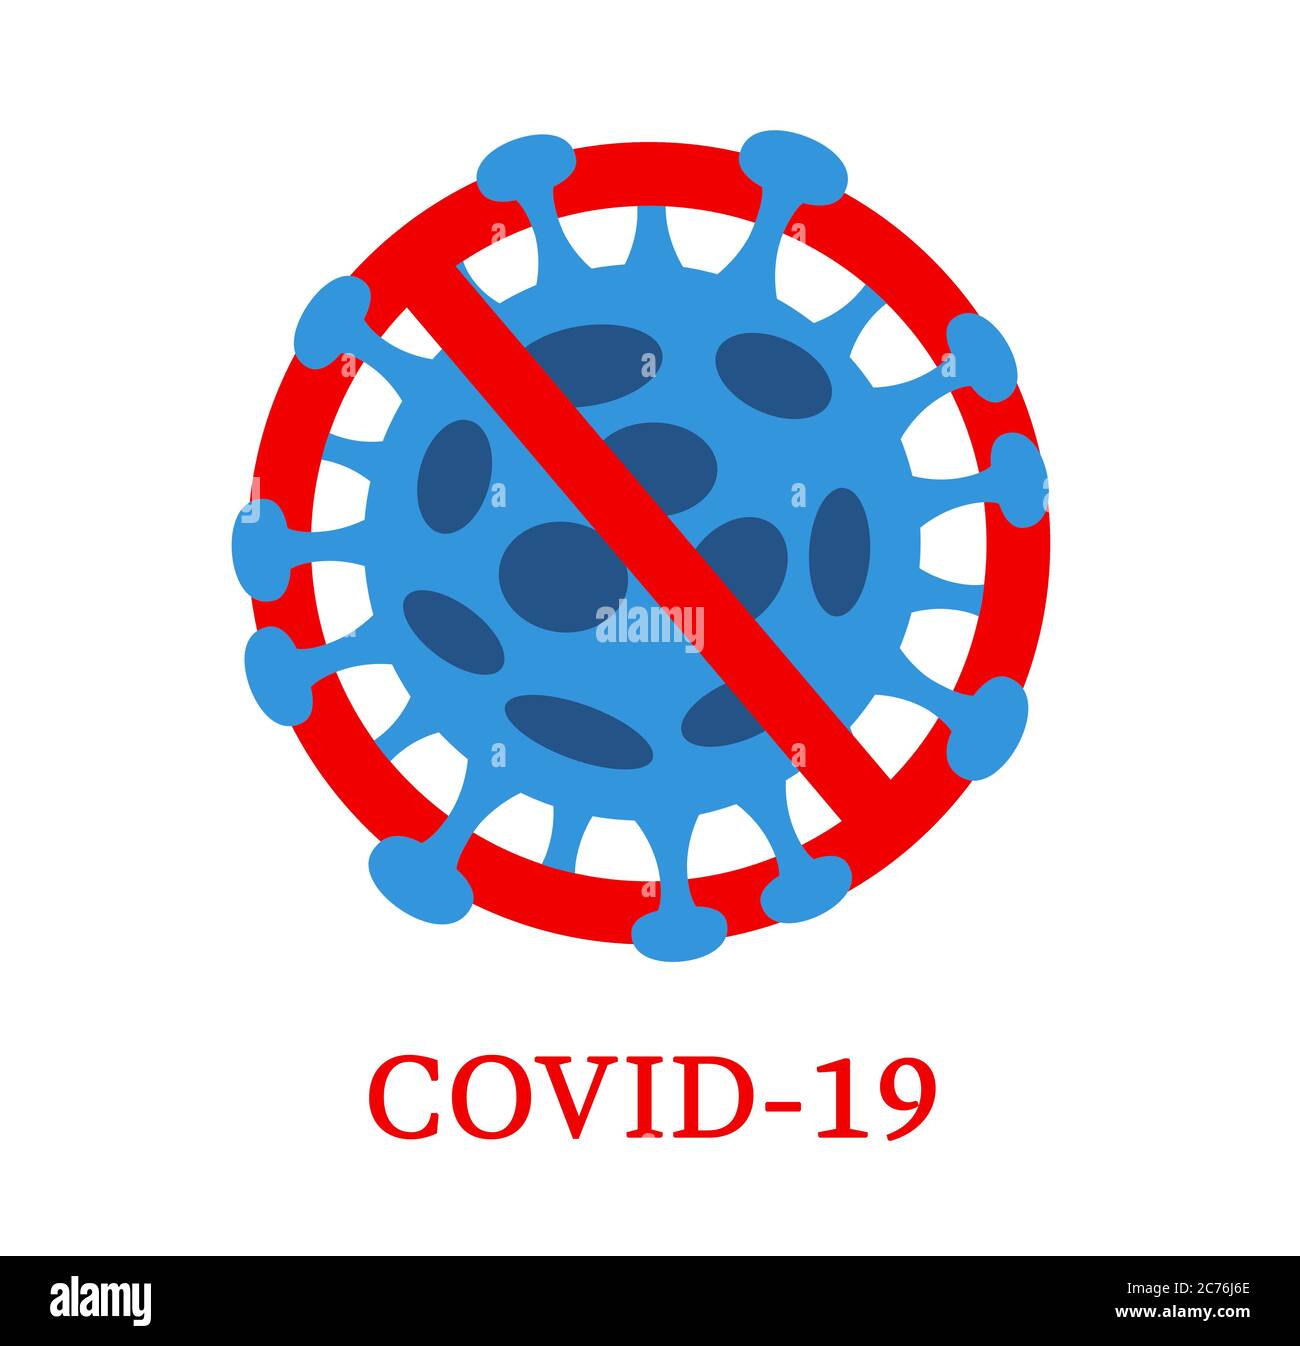 Abstract virus strain model Novel coronavirus 2019-nCoV is crossed out with red STOP sign. The danger of coronavirus and the risk to public health. Pa Stock Photo